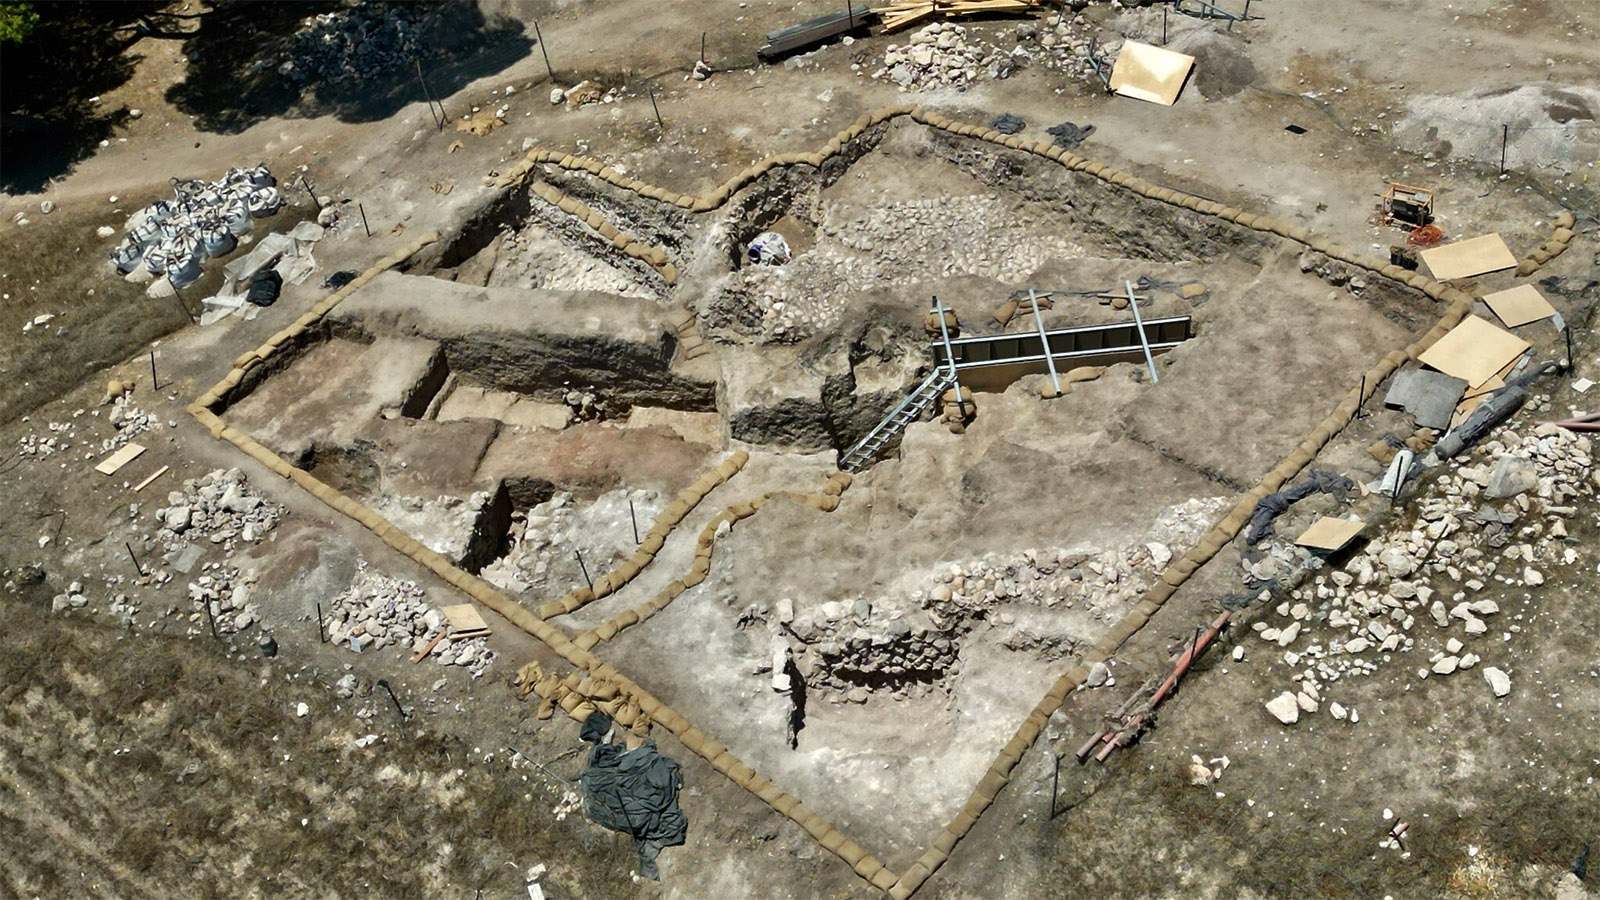 Tel Shimron excavations reveal 3,800-year-old architectural wonder of hidden passageway in Israel 1